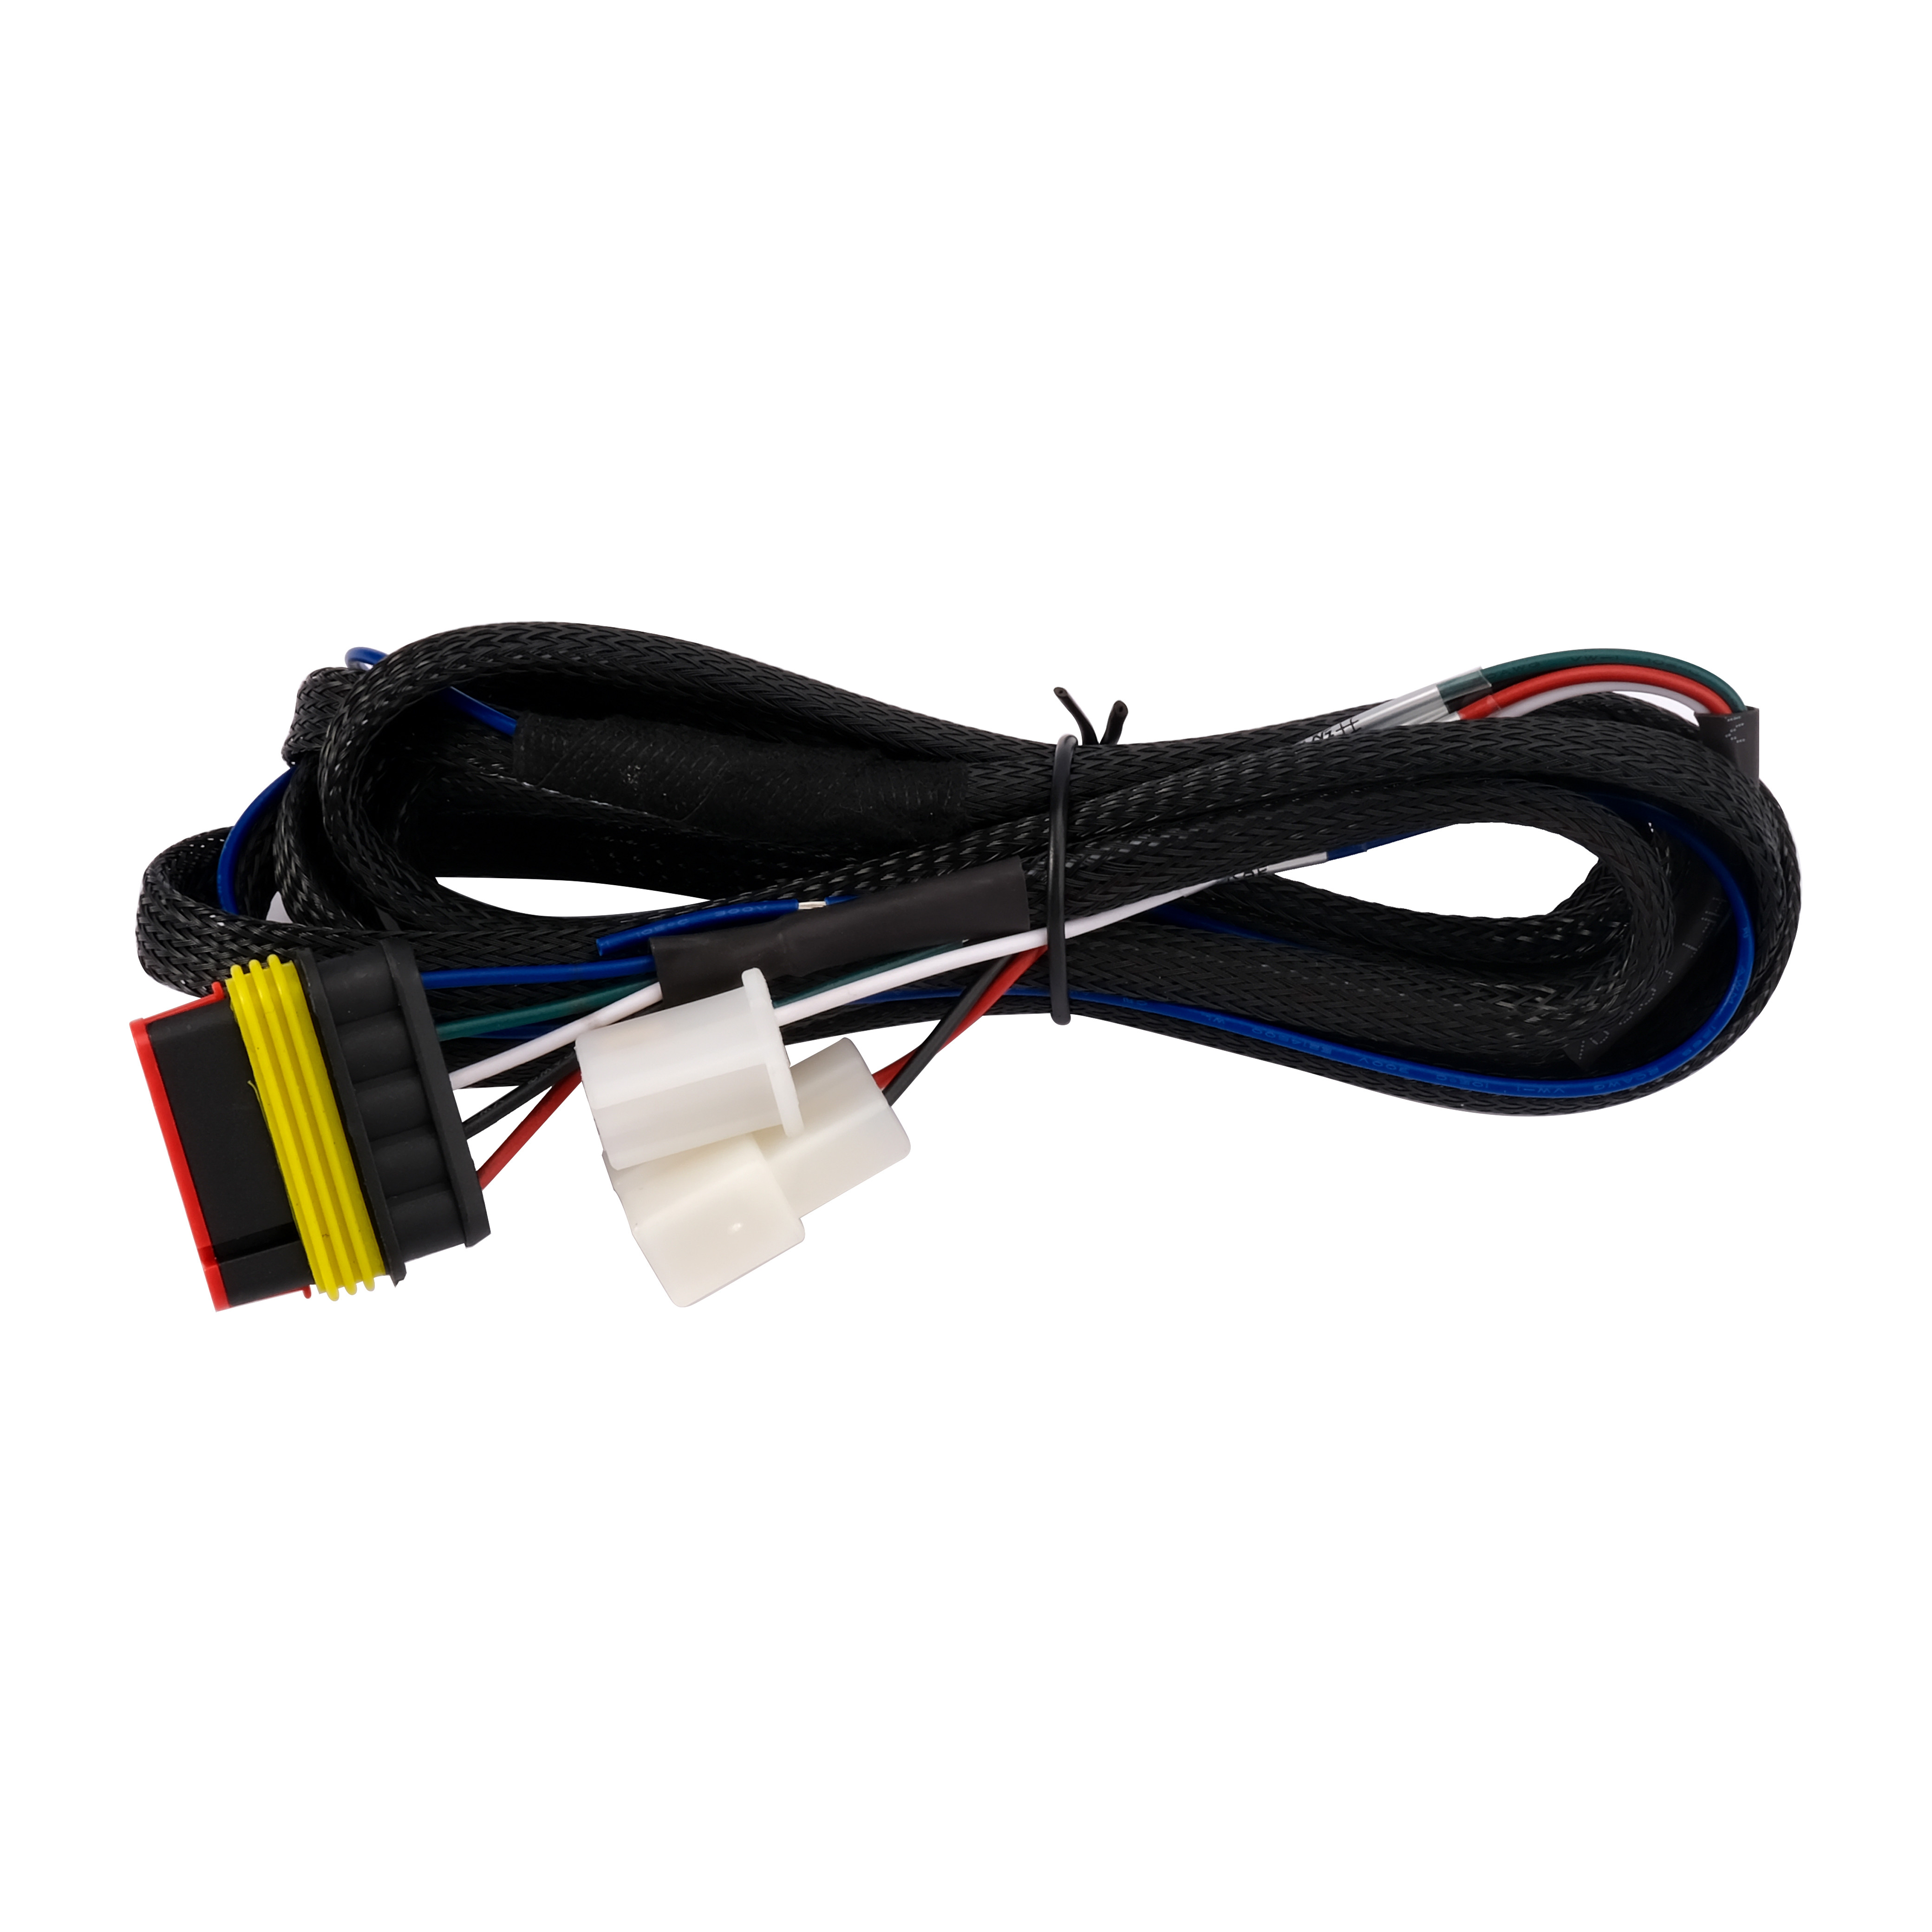 2.7M-4097 Overhead Light Extension Cord , Vehicle Car Wiring Harness